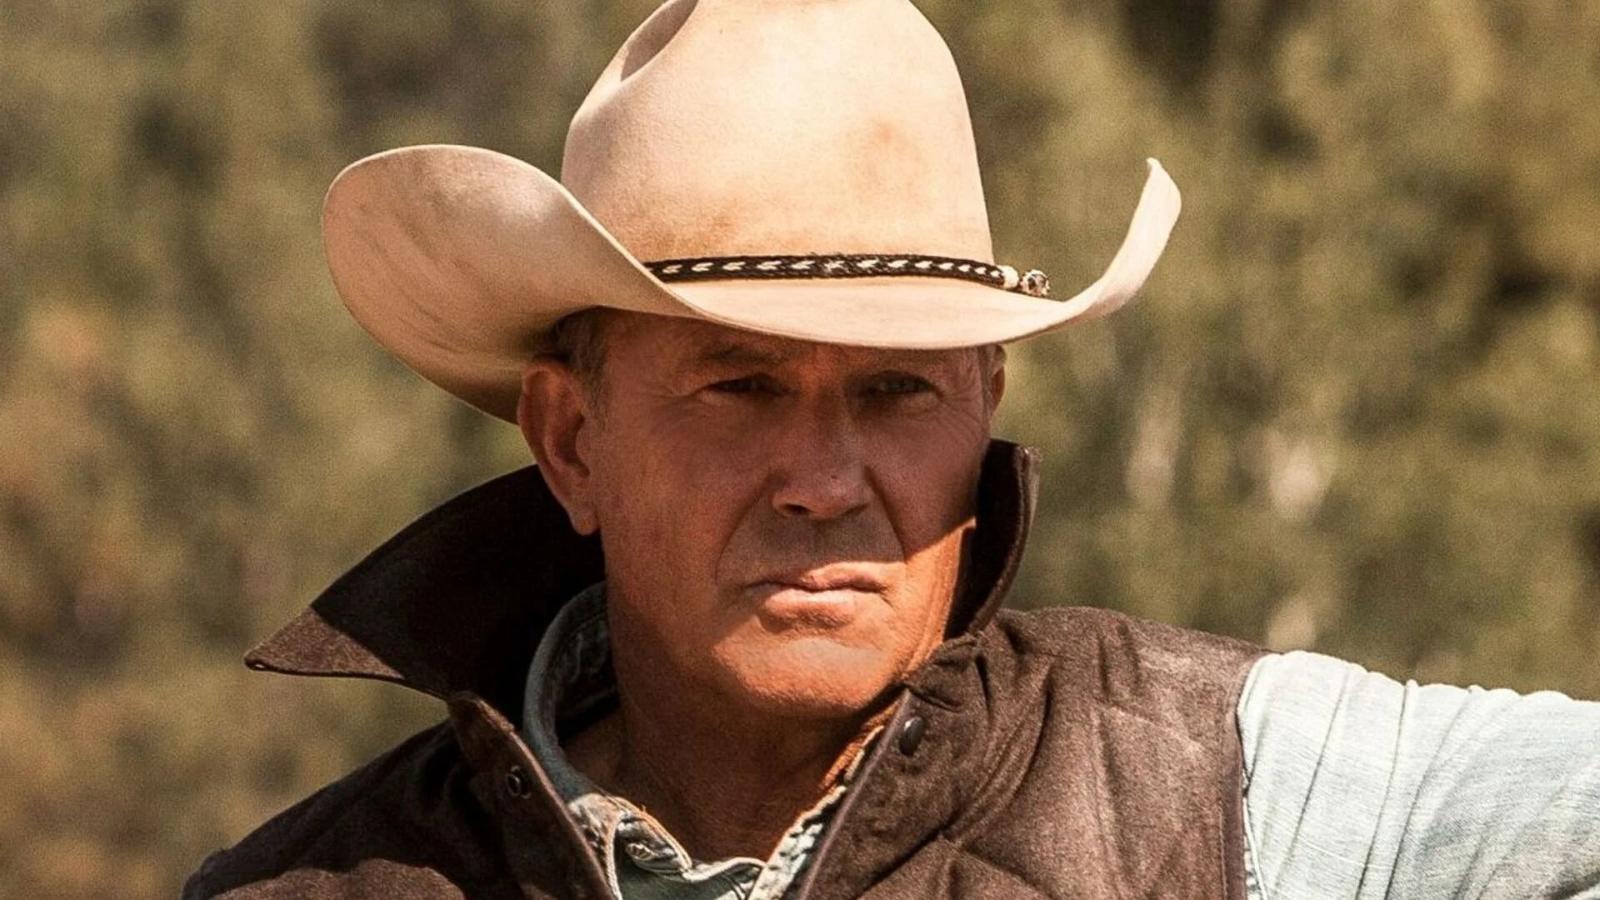 Kevin Costner as John Dutton in Yellowstone looking into the distance